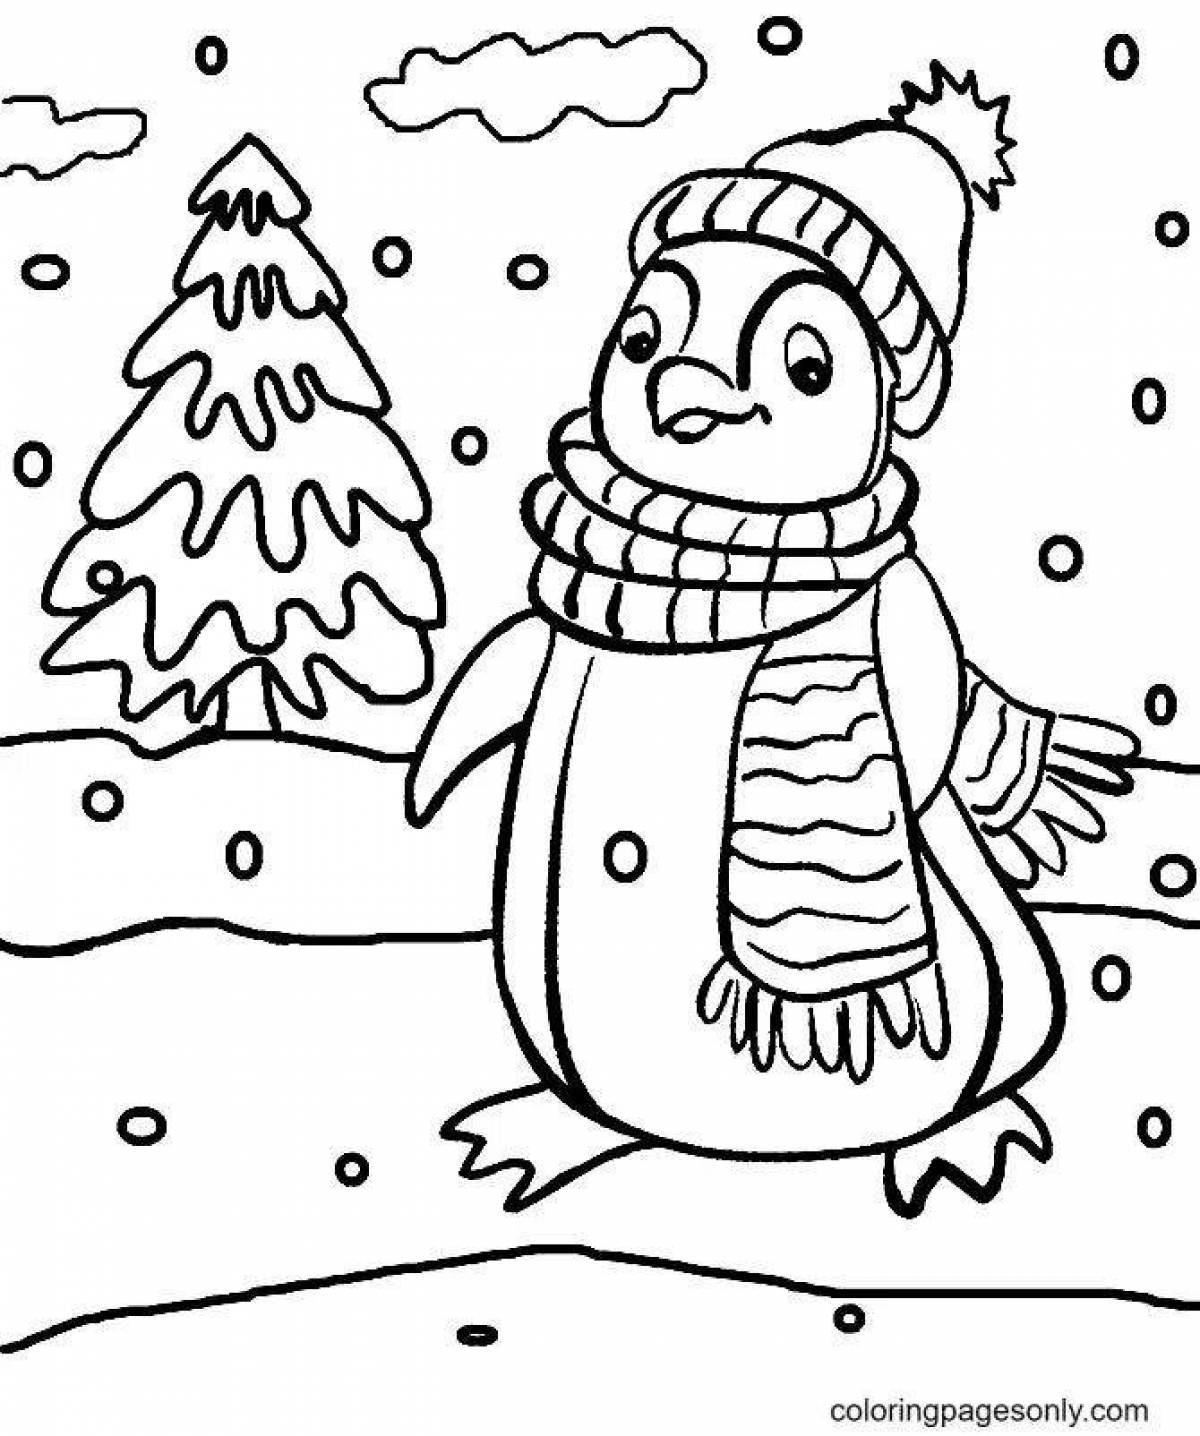 Coloring page dazzling christmas penguin